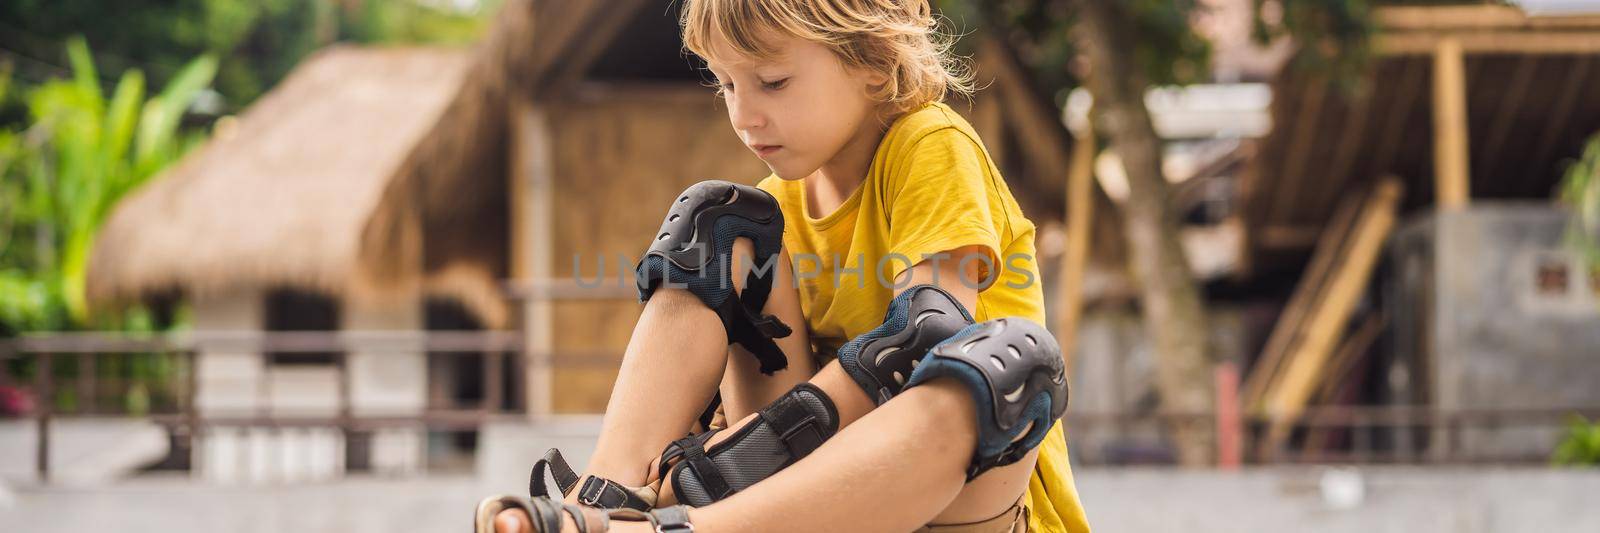 Boy puts on knee pads and armbands before training skate board. BANNER, LONG FORMAT